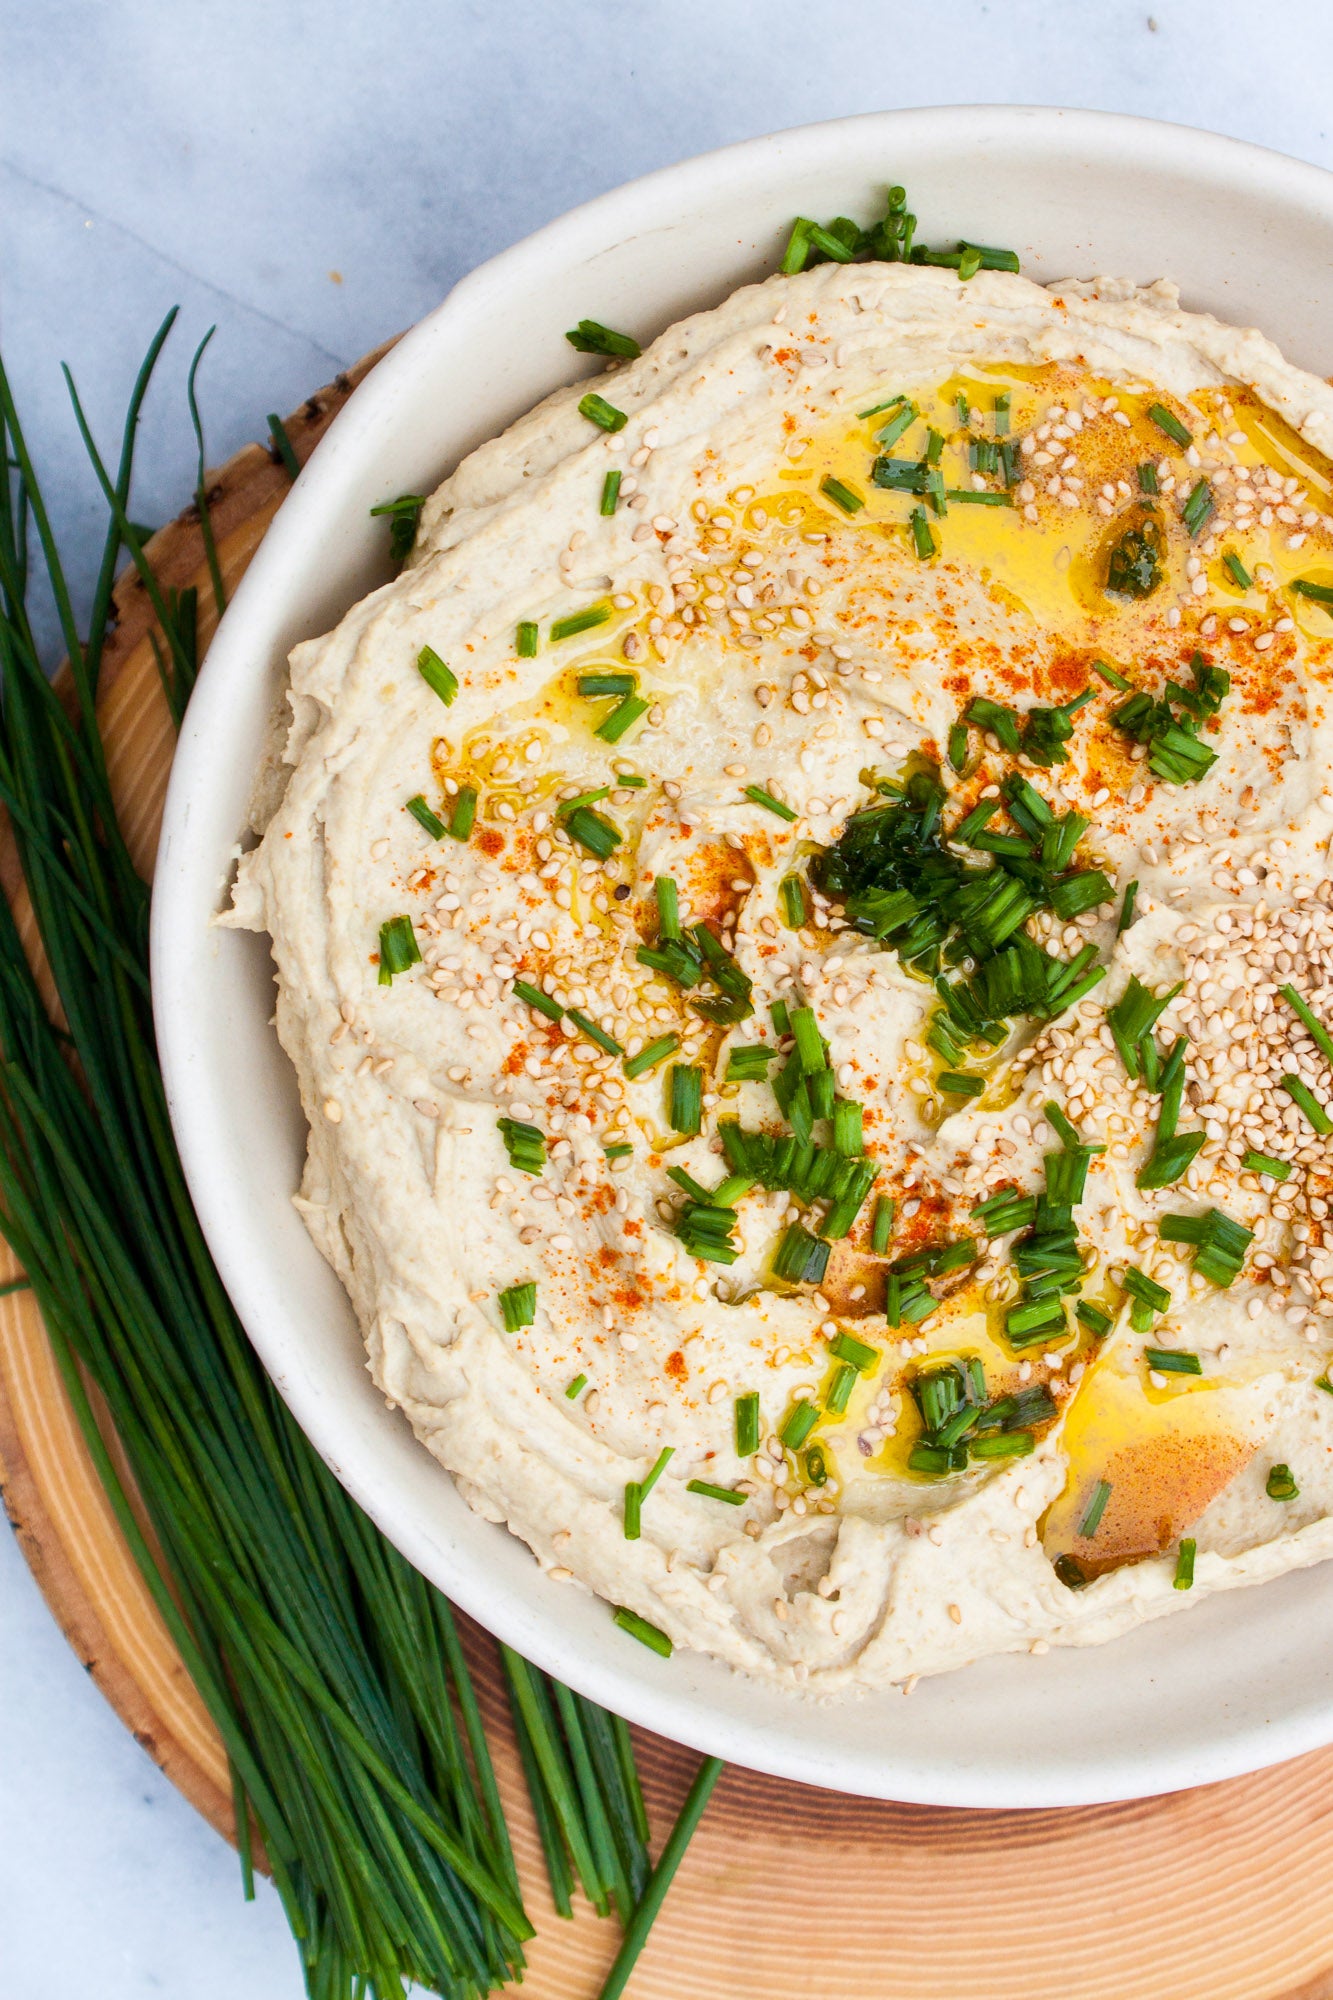 Cumin Spiced Lentil Hummus with Chives & Chiles